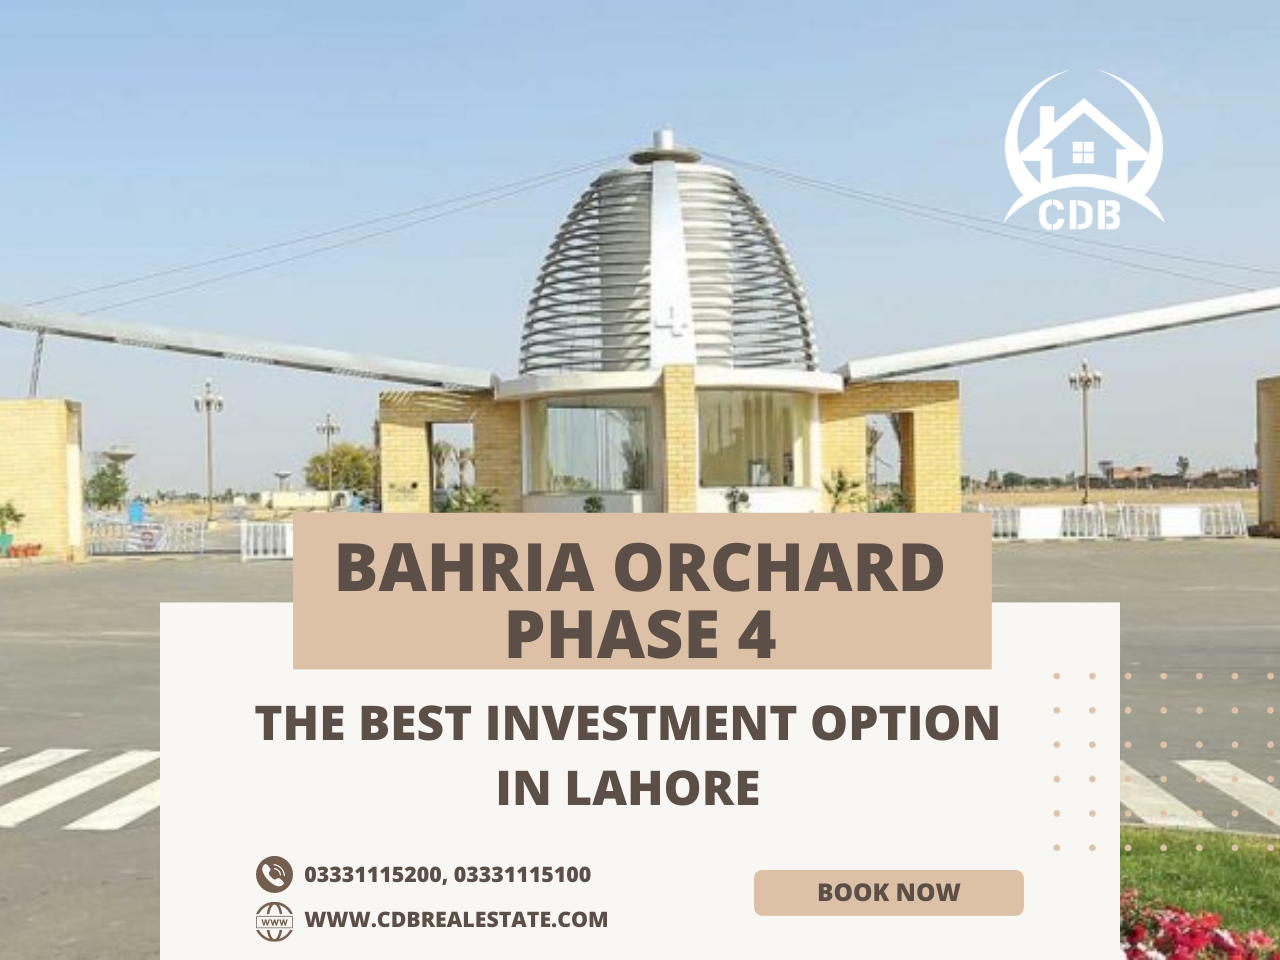 Bahria Orchard Phase 4: The Best Investment Option in Lahore